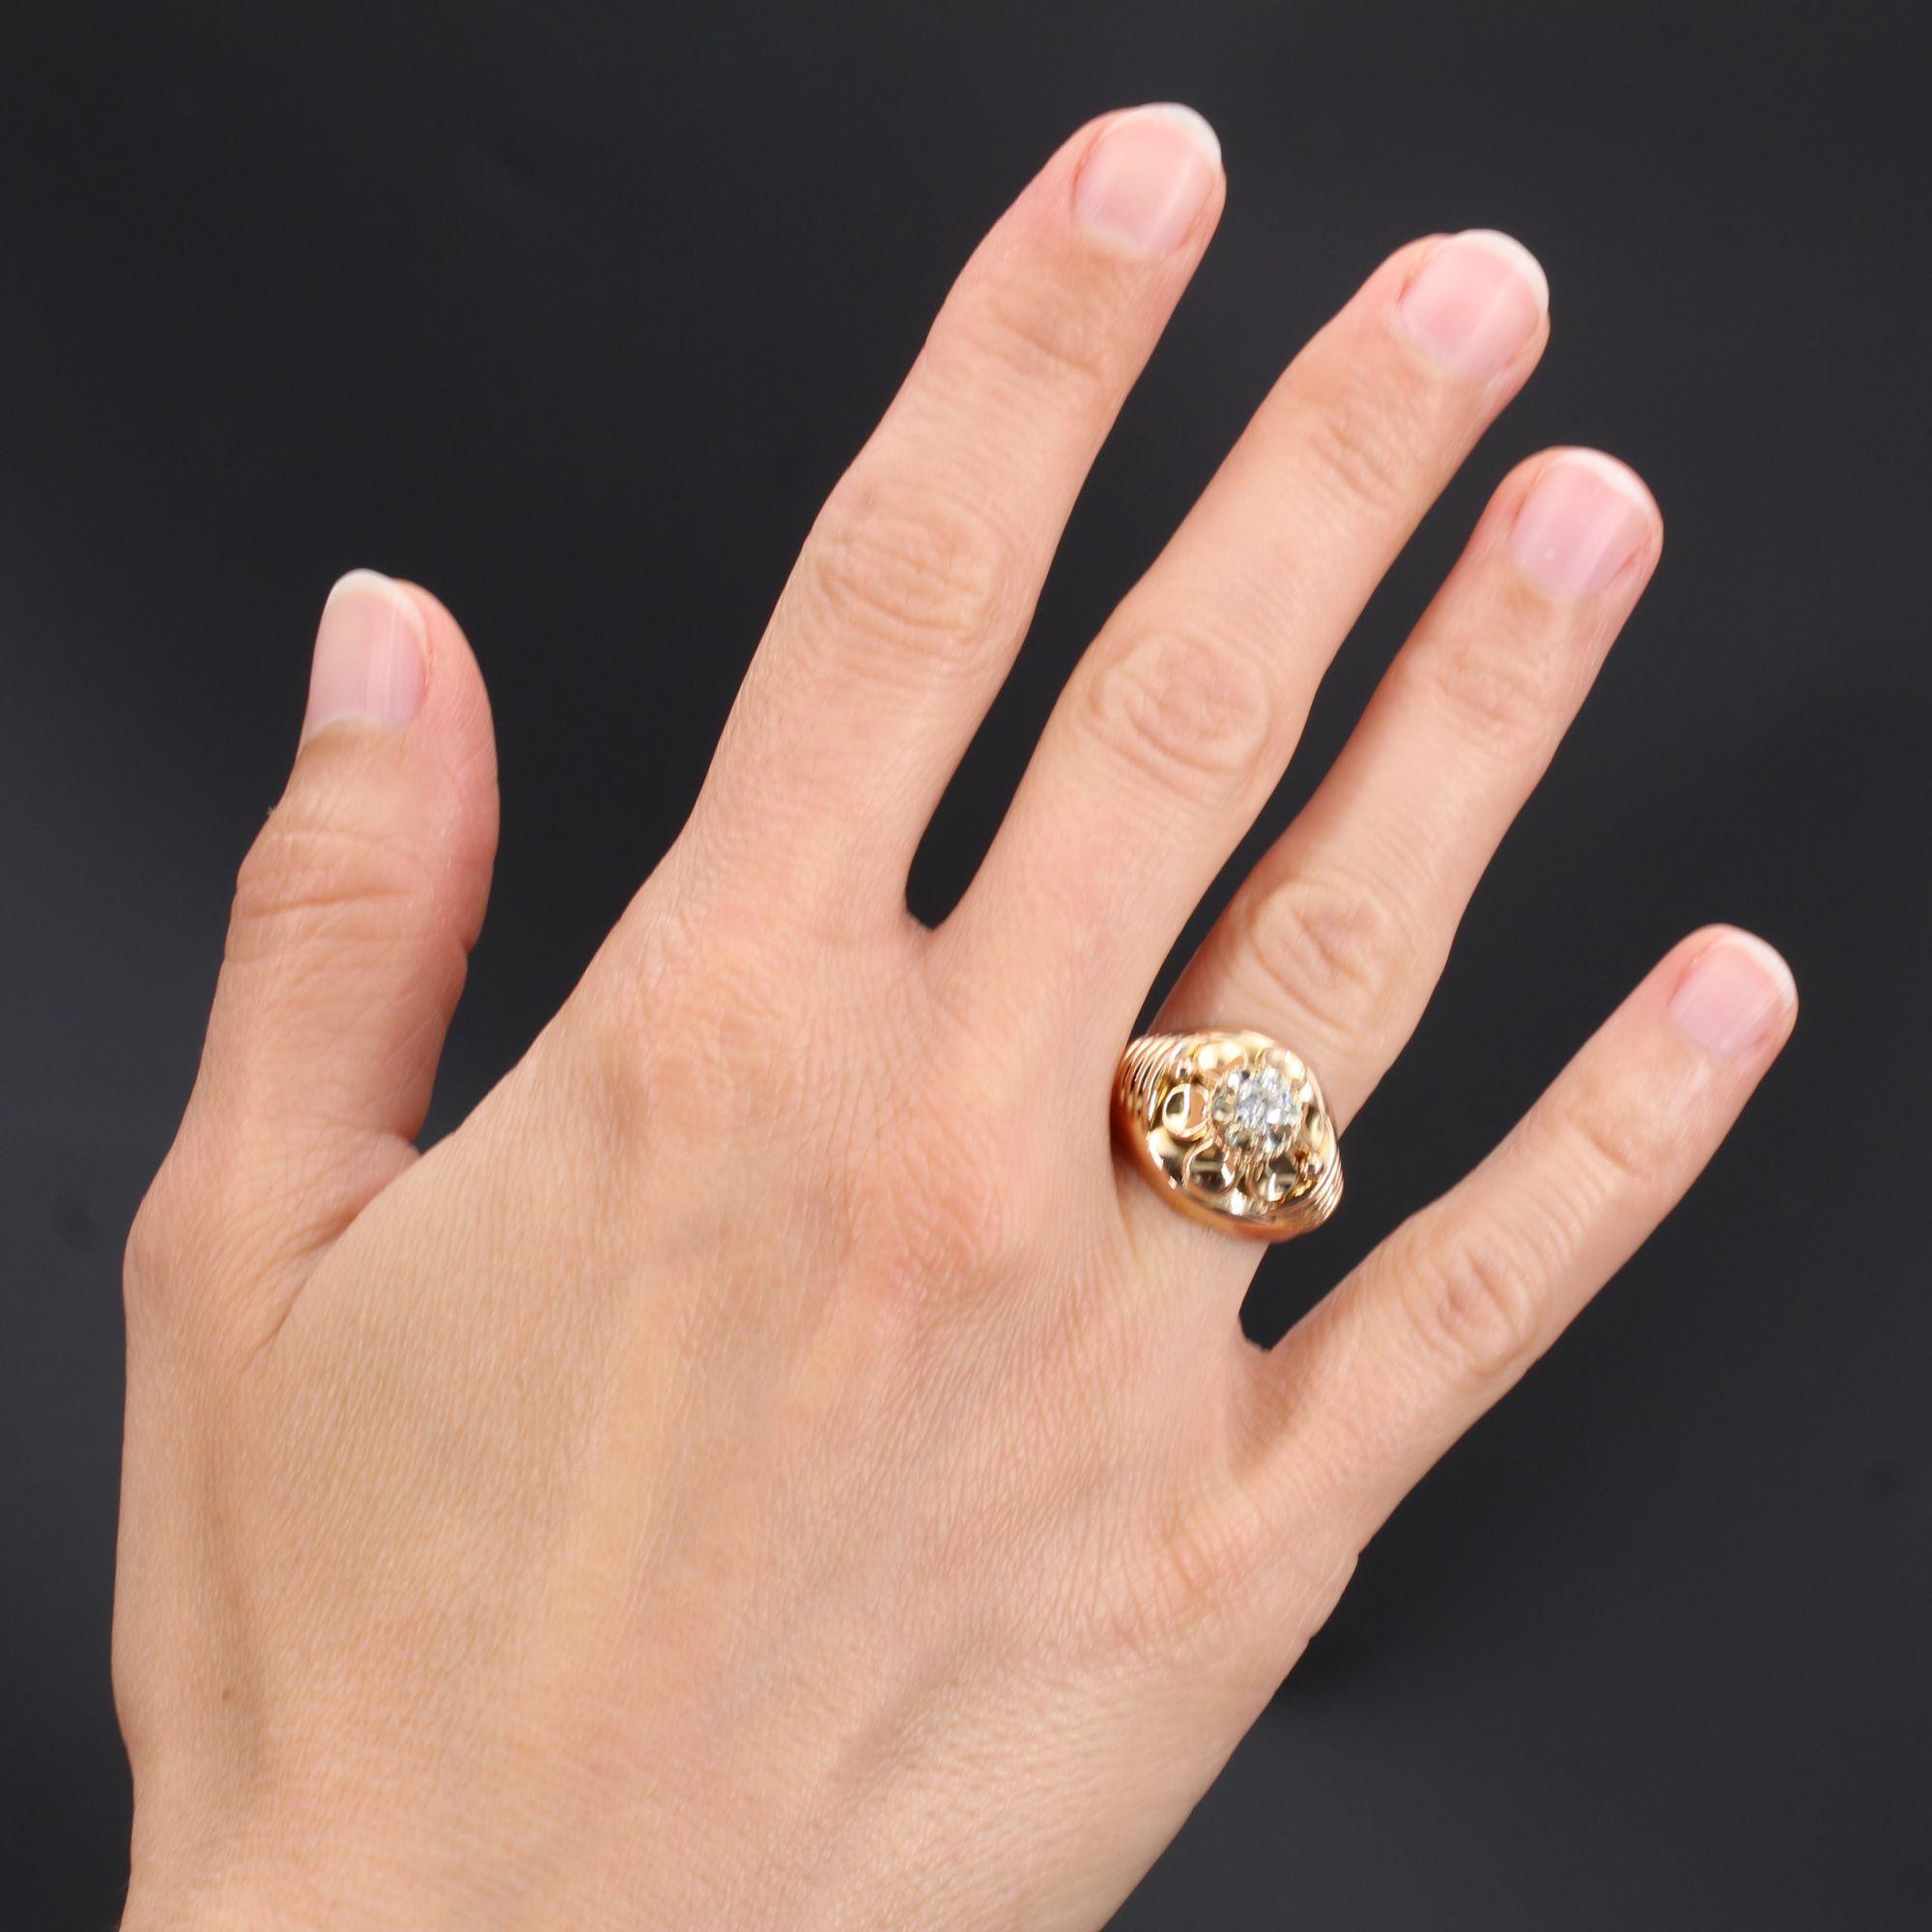 Ring in 18 karat rose gold, eagle head hallmark.
This beautiful domed ring represents a flower whose heart is an antique brilliant-cut diamond, surrounded by a thin gold cord. The petals are curved and the start of the ring, on both sides, is made